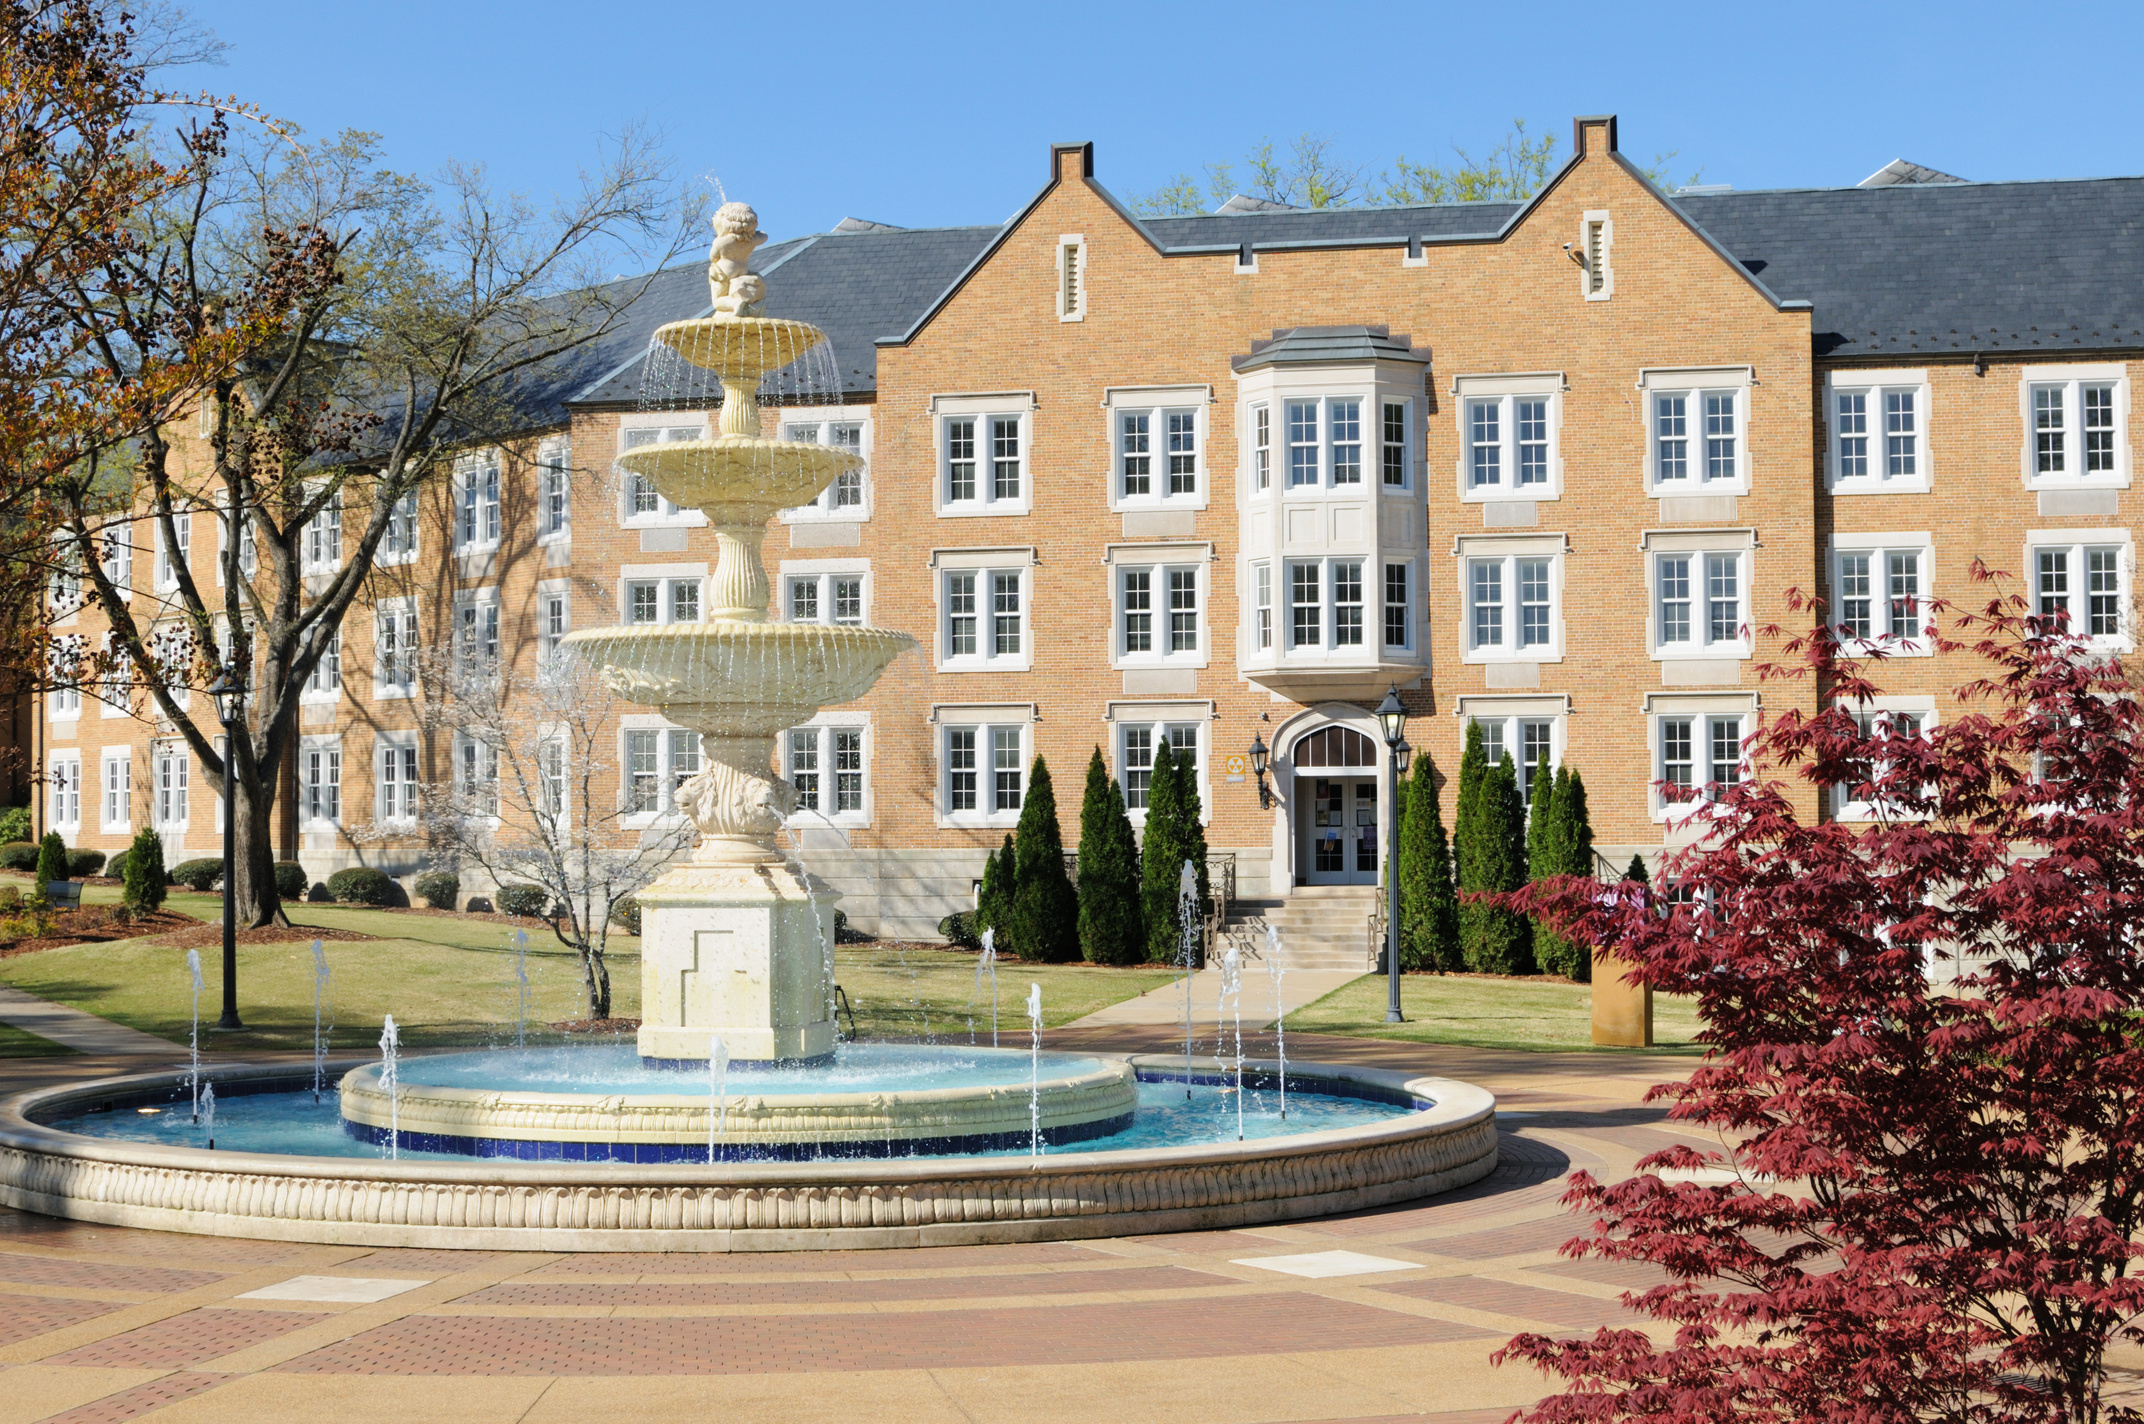 Fountain on college campus